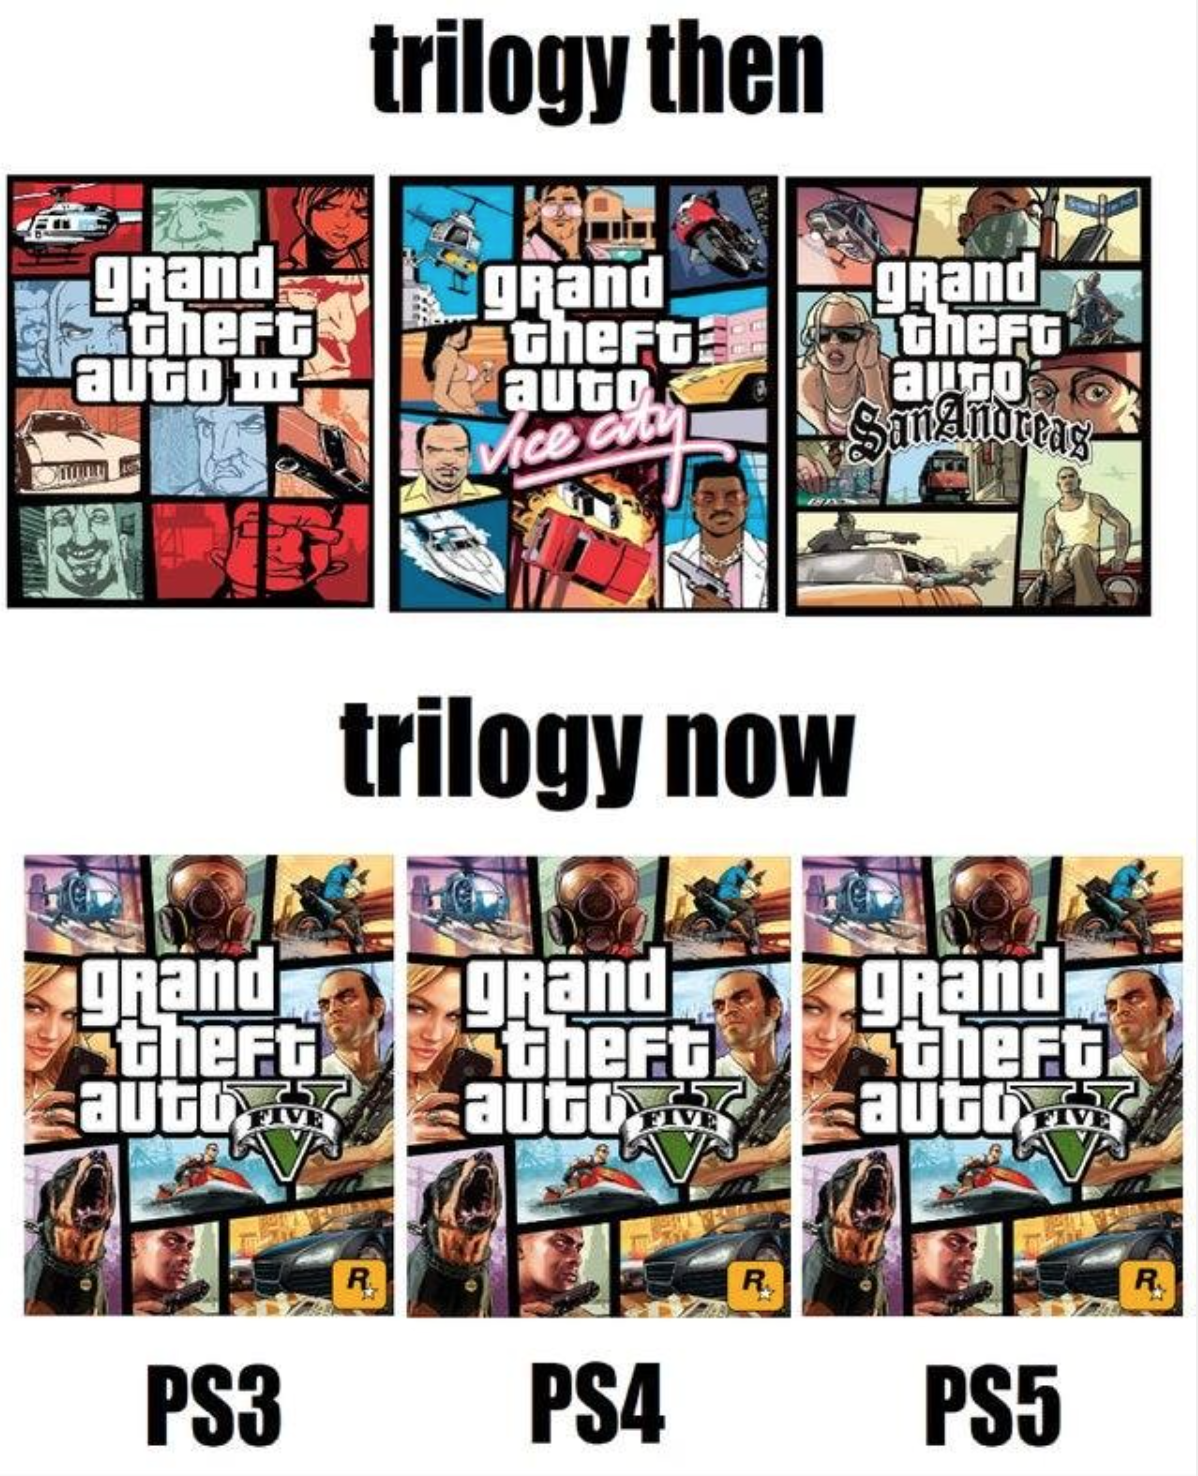 funny gaming memes  - gta 3 - trilogy then grand theft auto grand theft autor grand itheft auto San Andreas Vice ale trilogy now grand theft auto Havn grandi tinert auto, V grand theft auto, Ava PS3 PS4 PS5